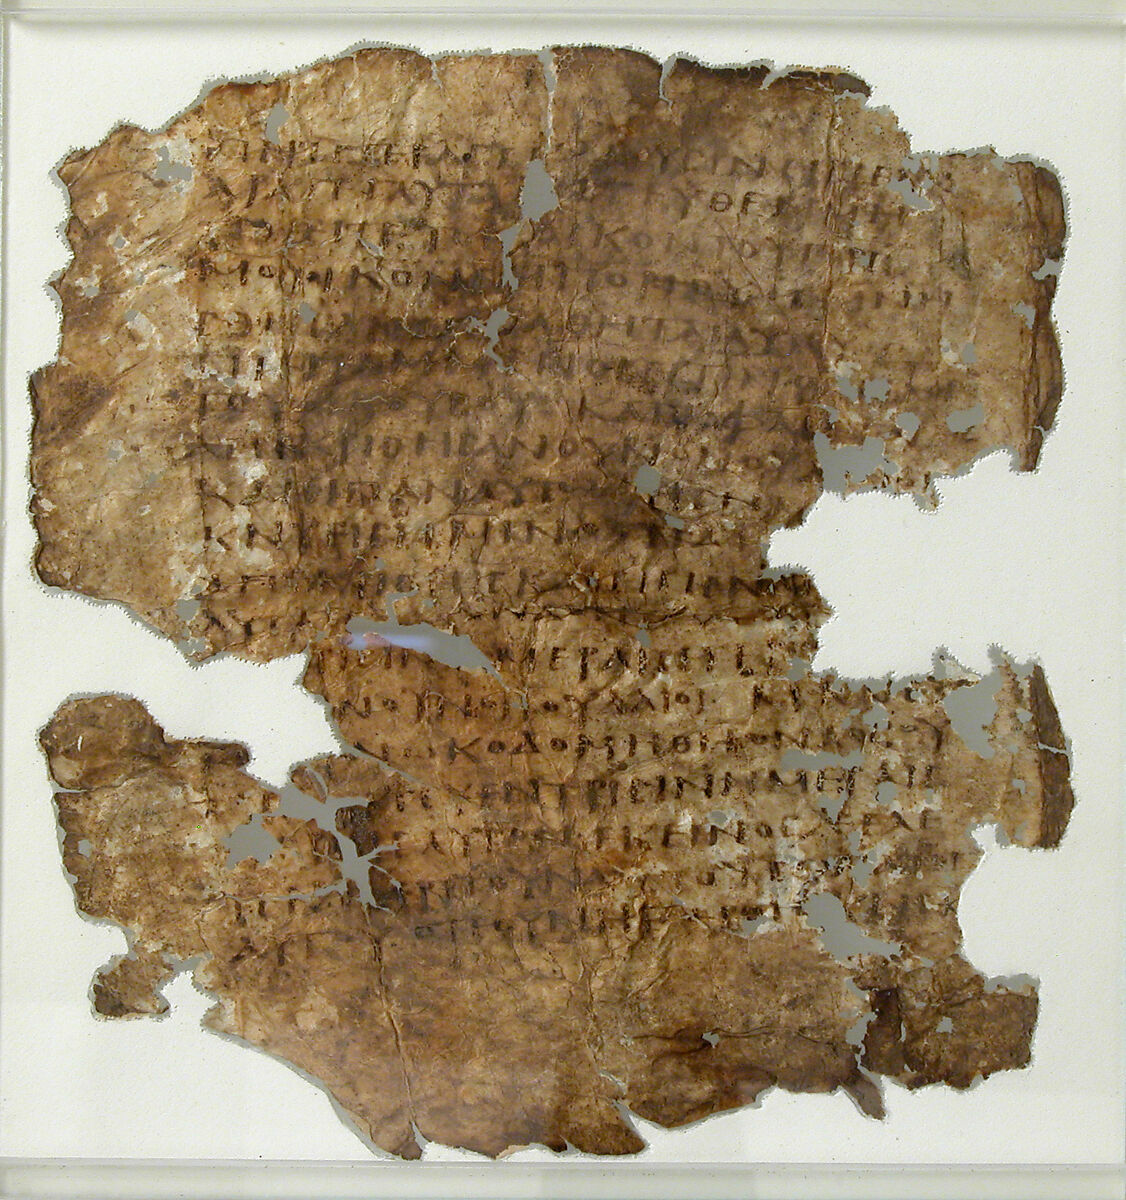 Fragment of the Gospel of St. John 2:11-22, Ink on parchment, Egyptian 